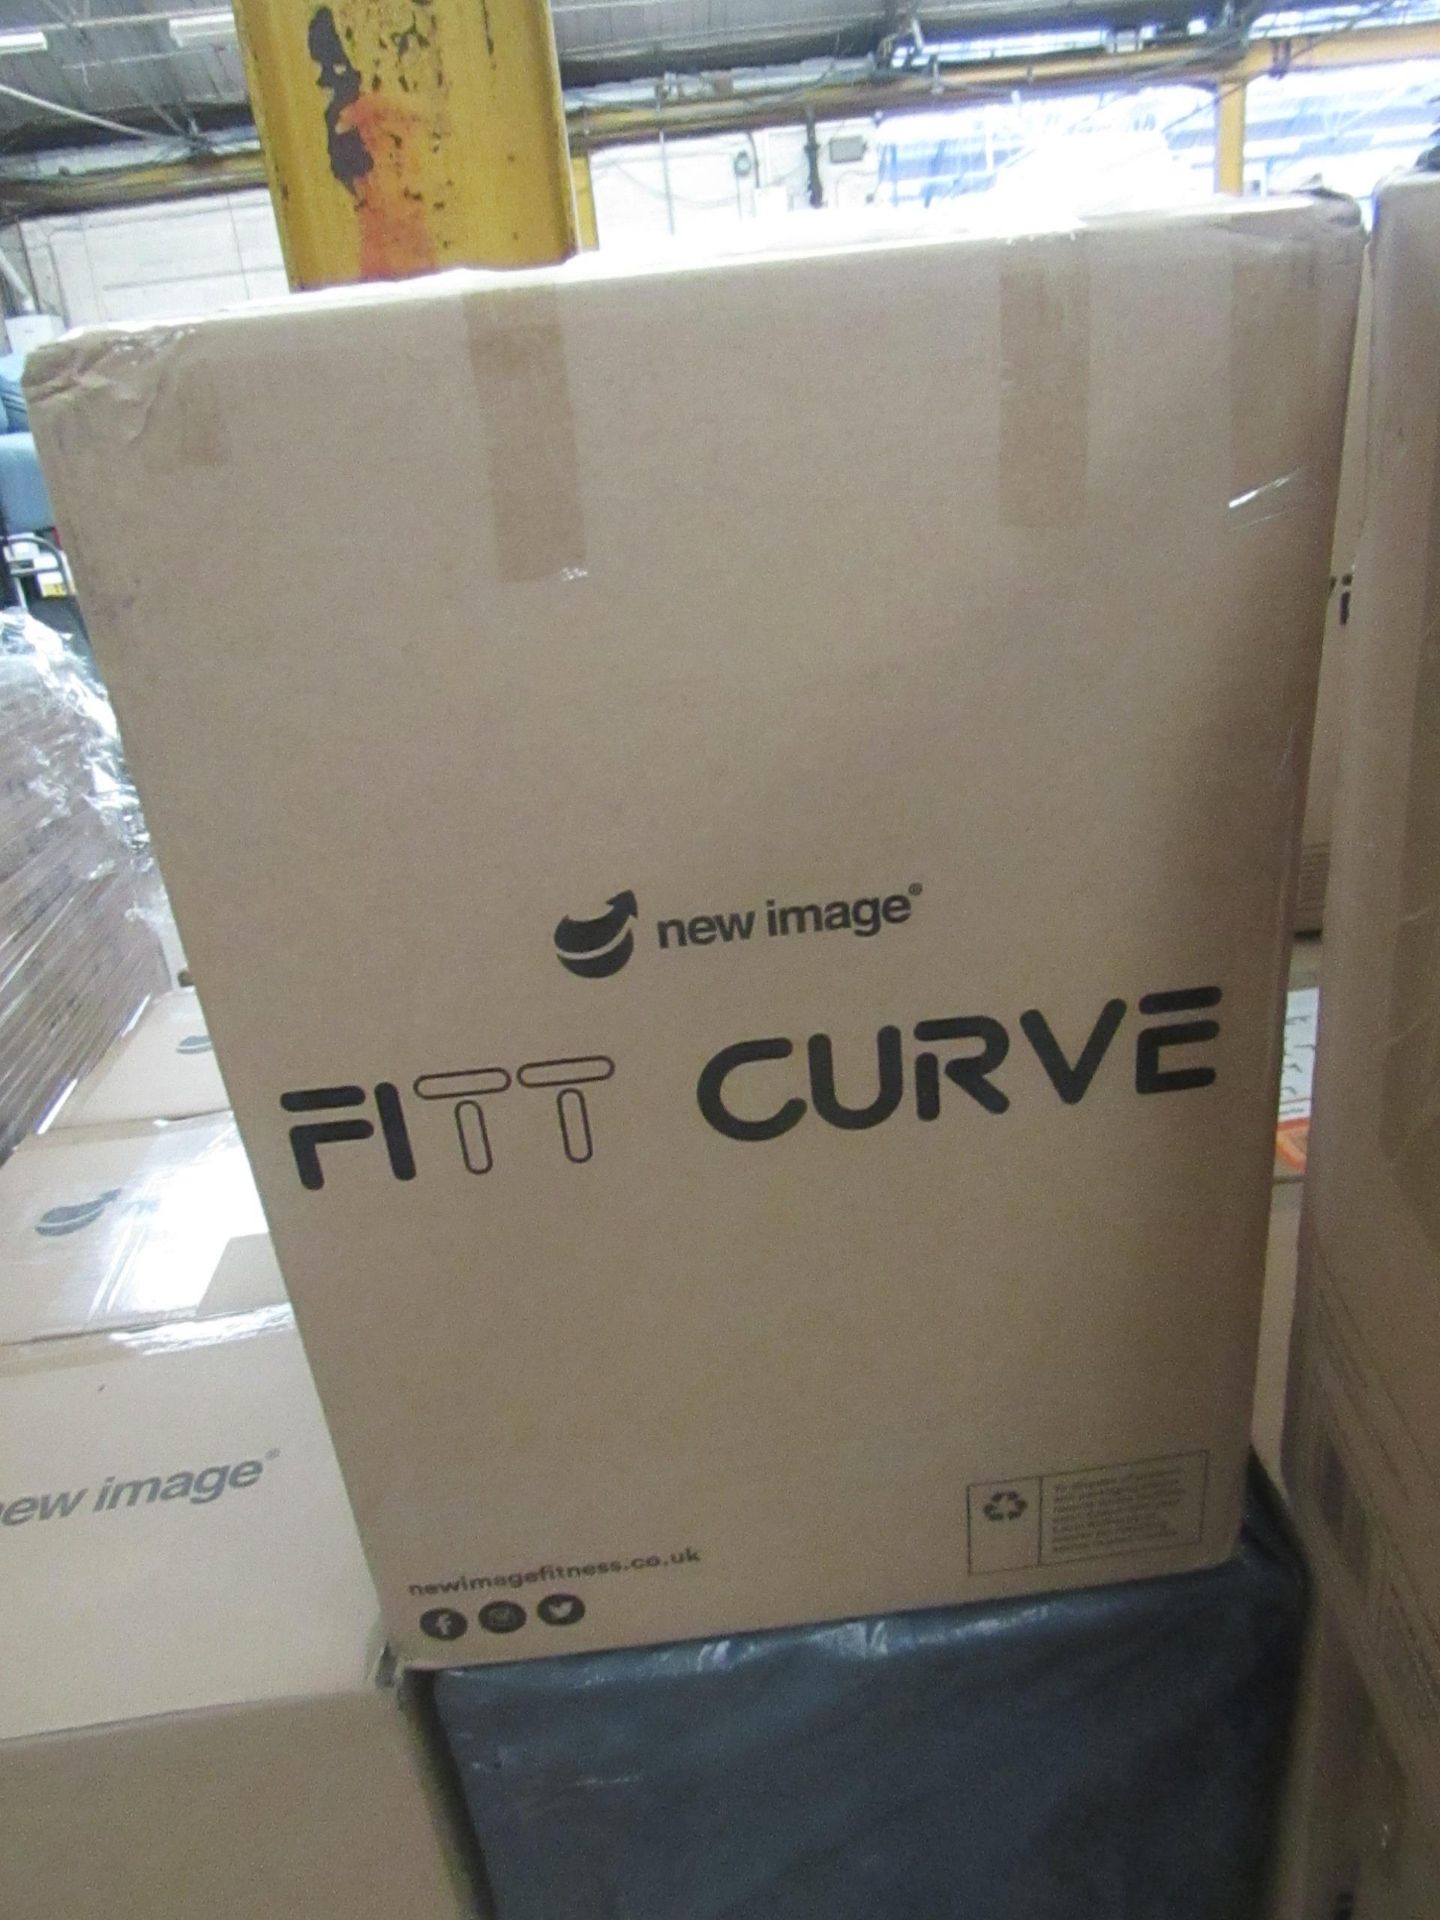 | 2X | NEW IMAGE FITT CURVE | UNCHECKED & BOXED | NO ONLINE RESALE | SKU C5060784670047 | RRP £49.99